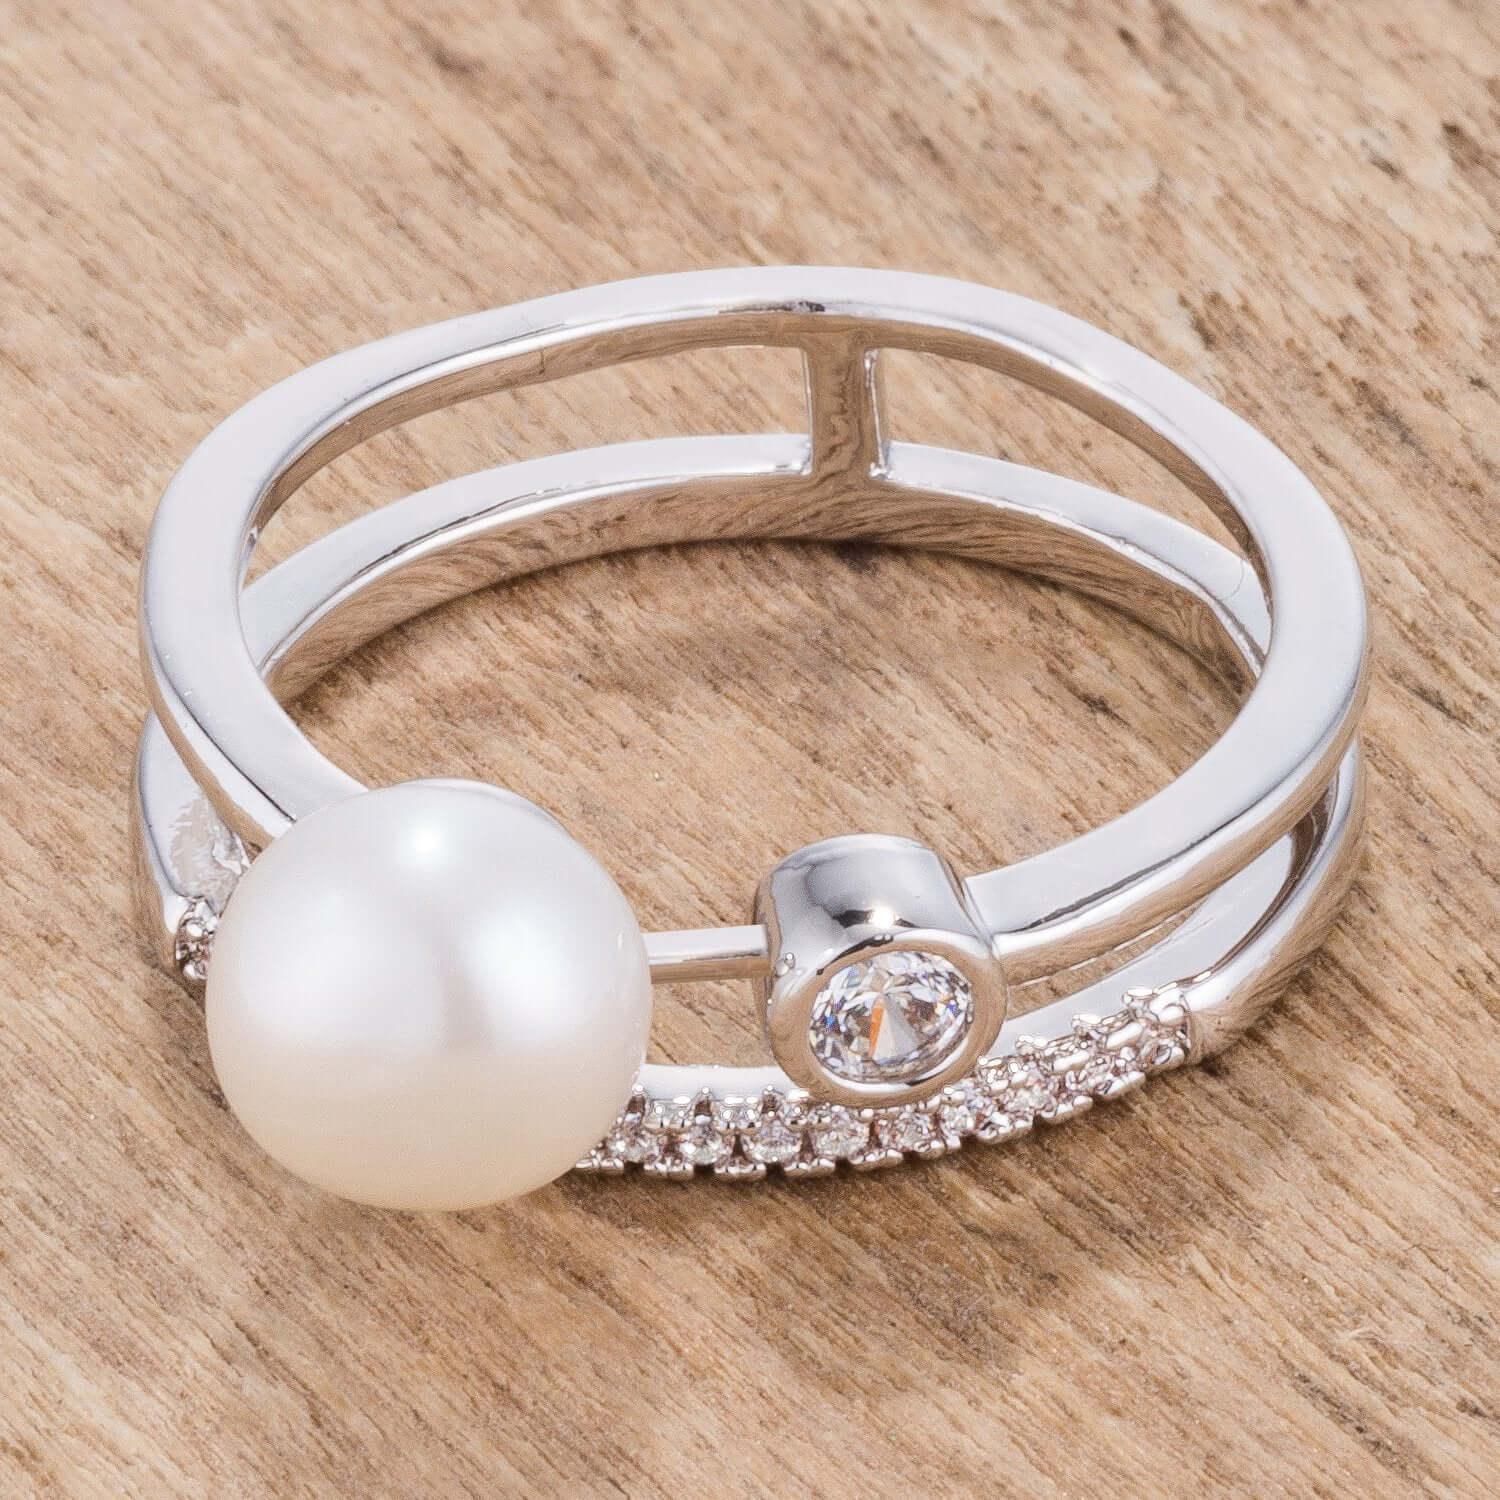 .15Ct Rhodium Plated CZ and Freshwater Pearl Contemporary Double Band Ring - JGI